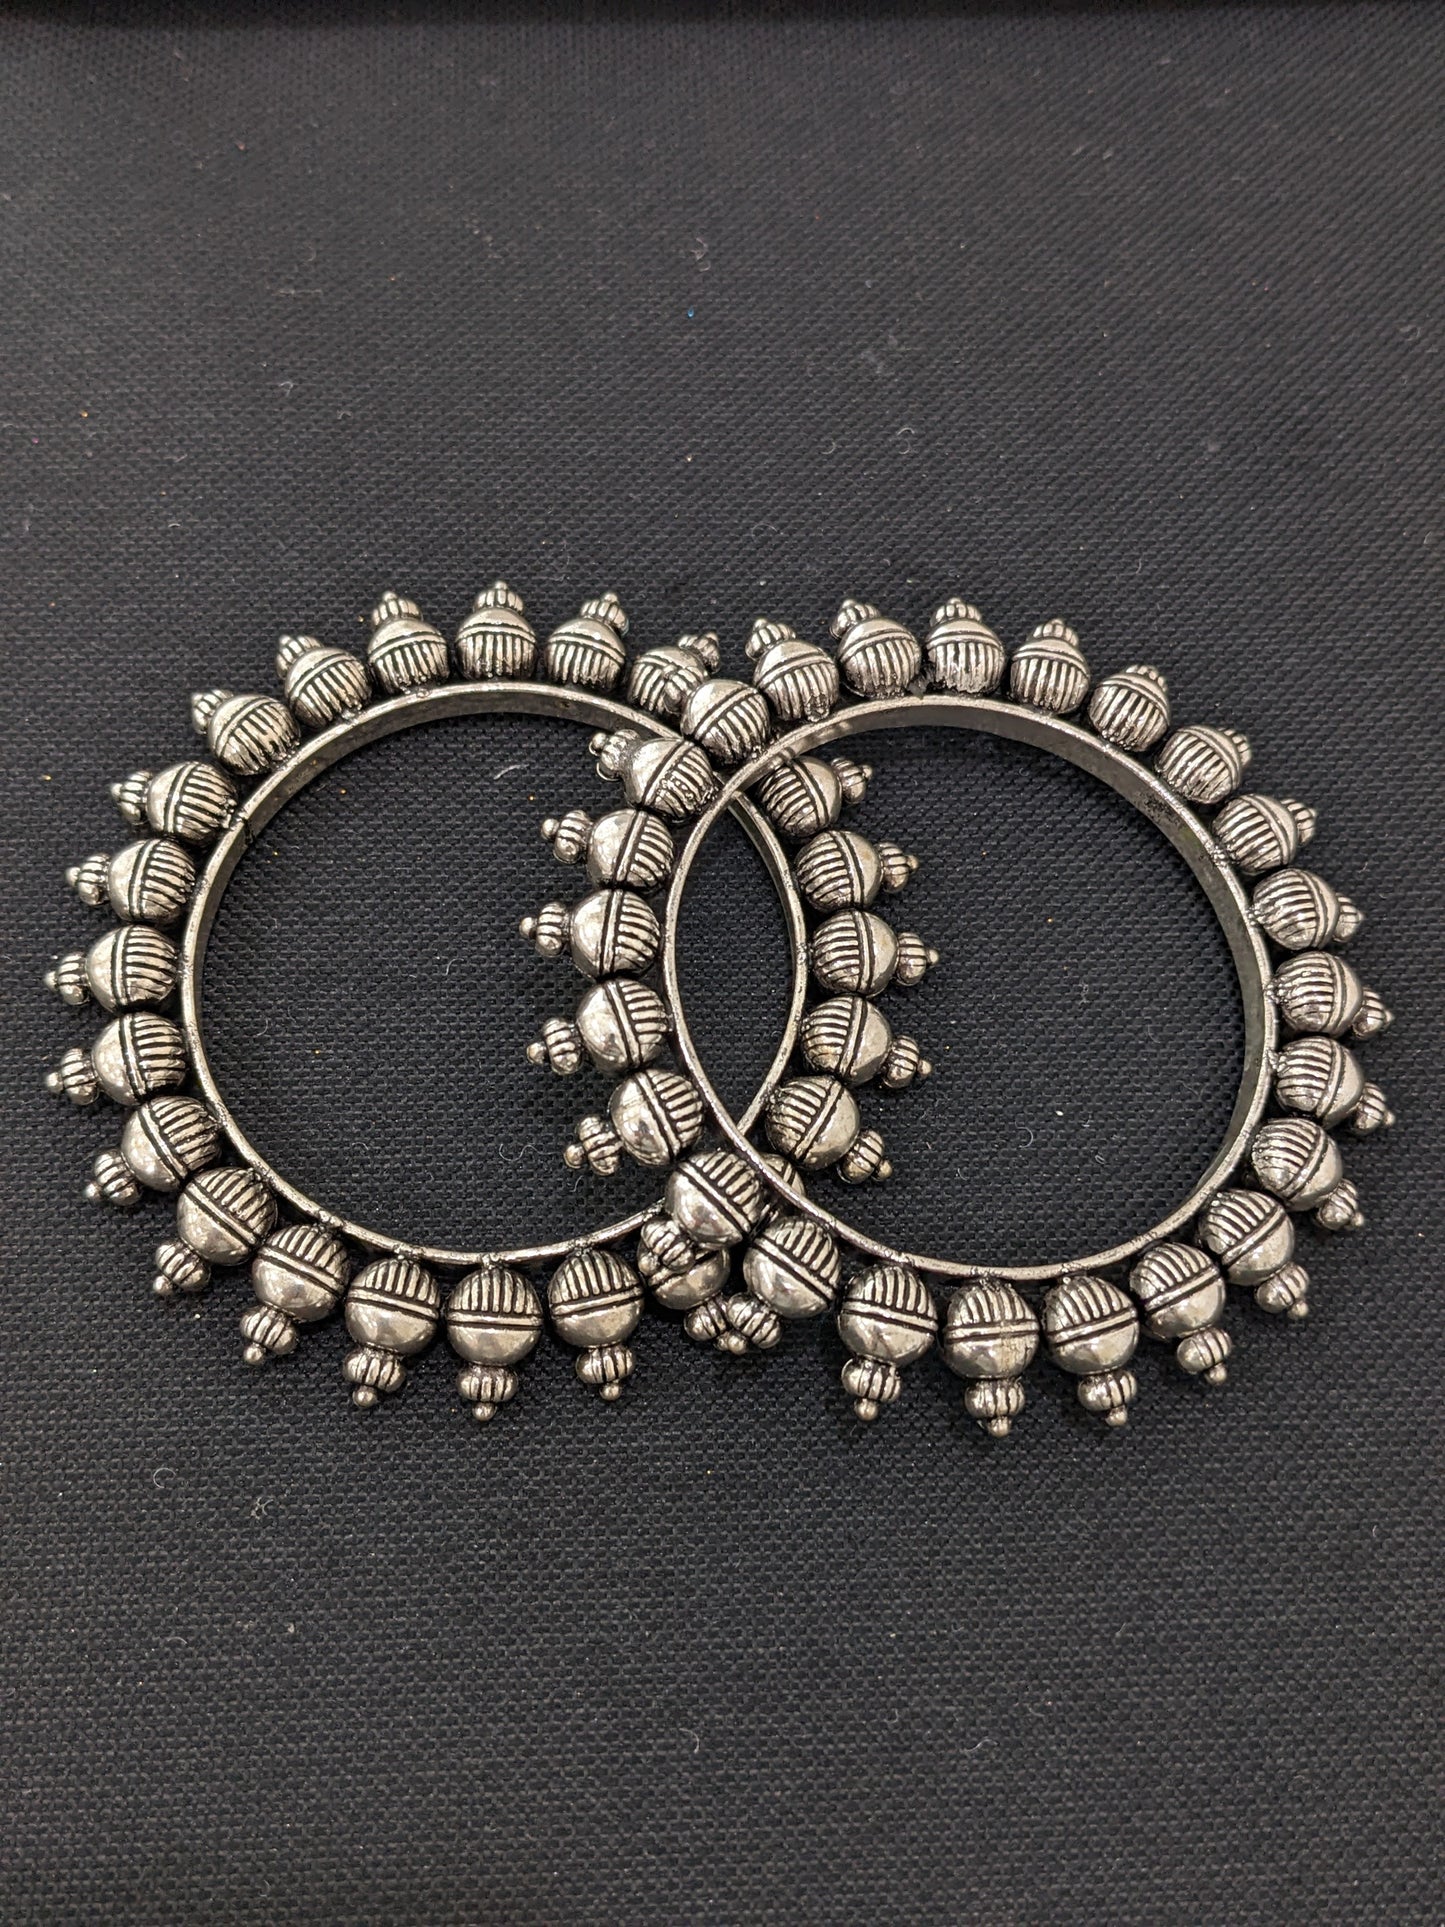 Oxidized silver pair bangles - Lined ball design